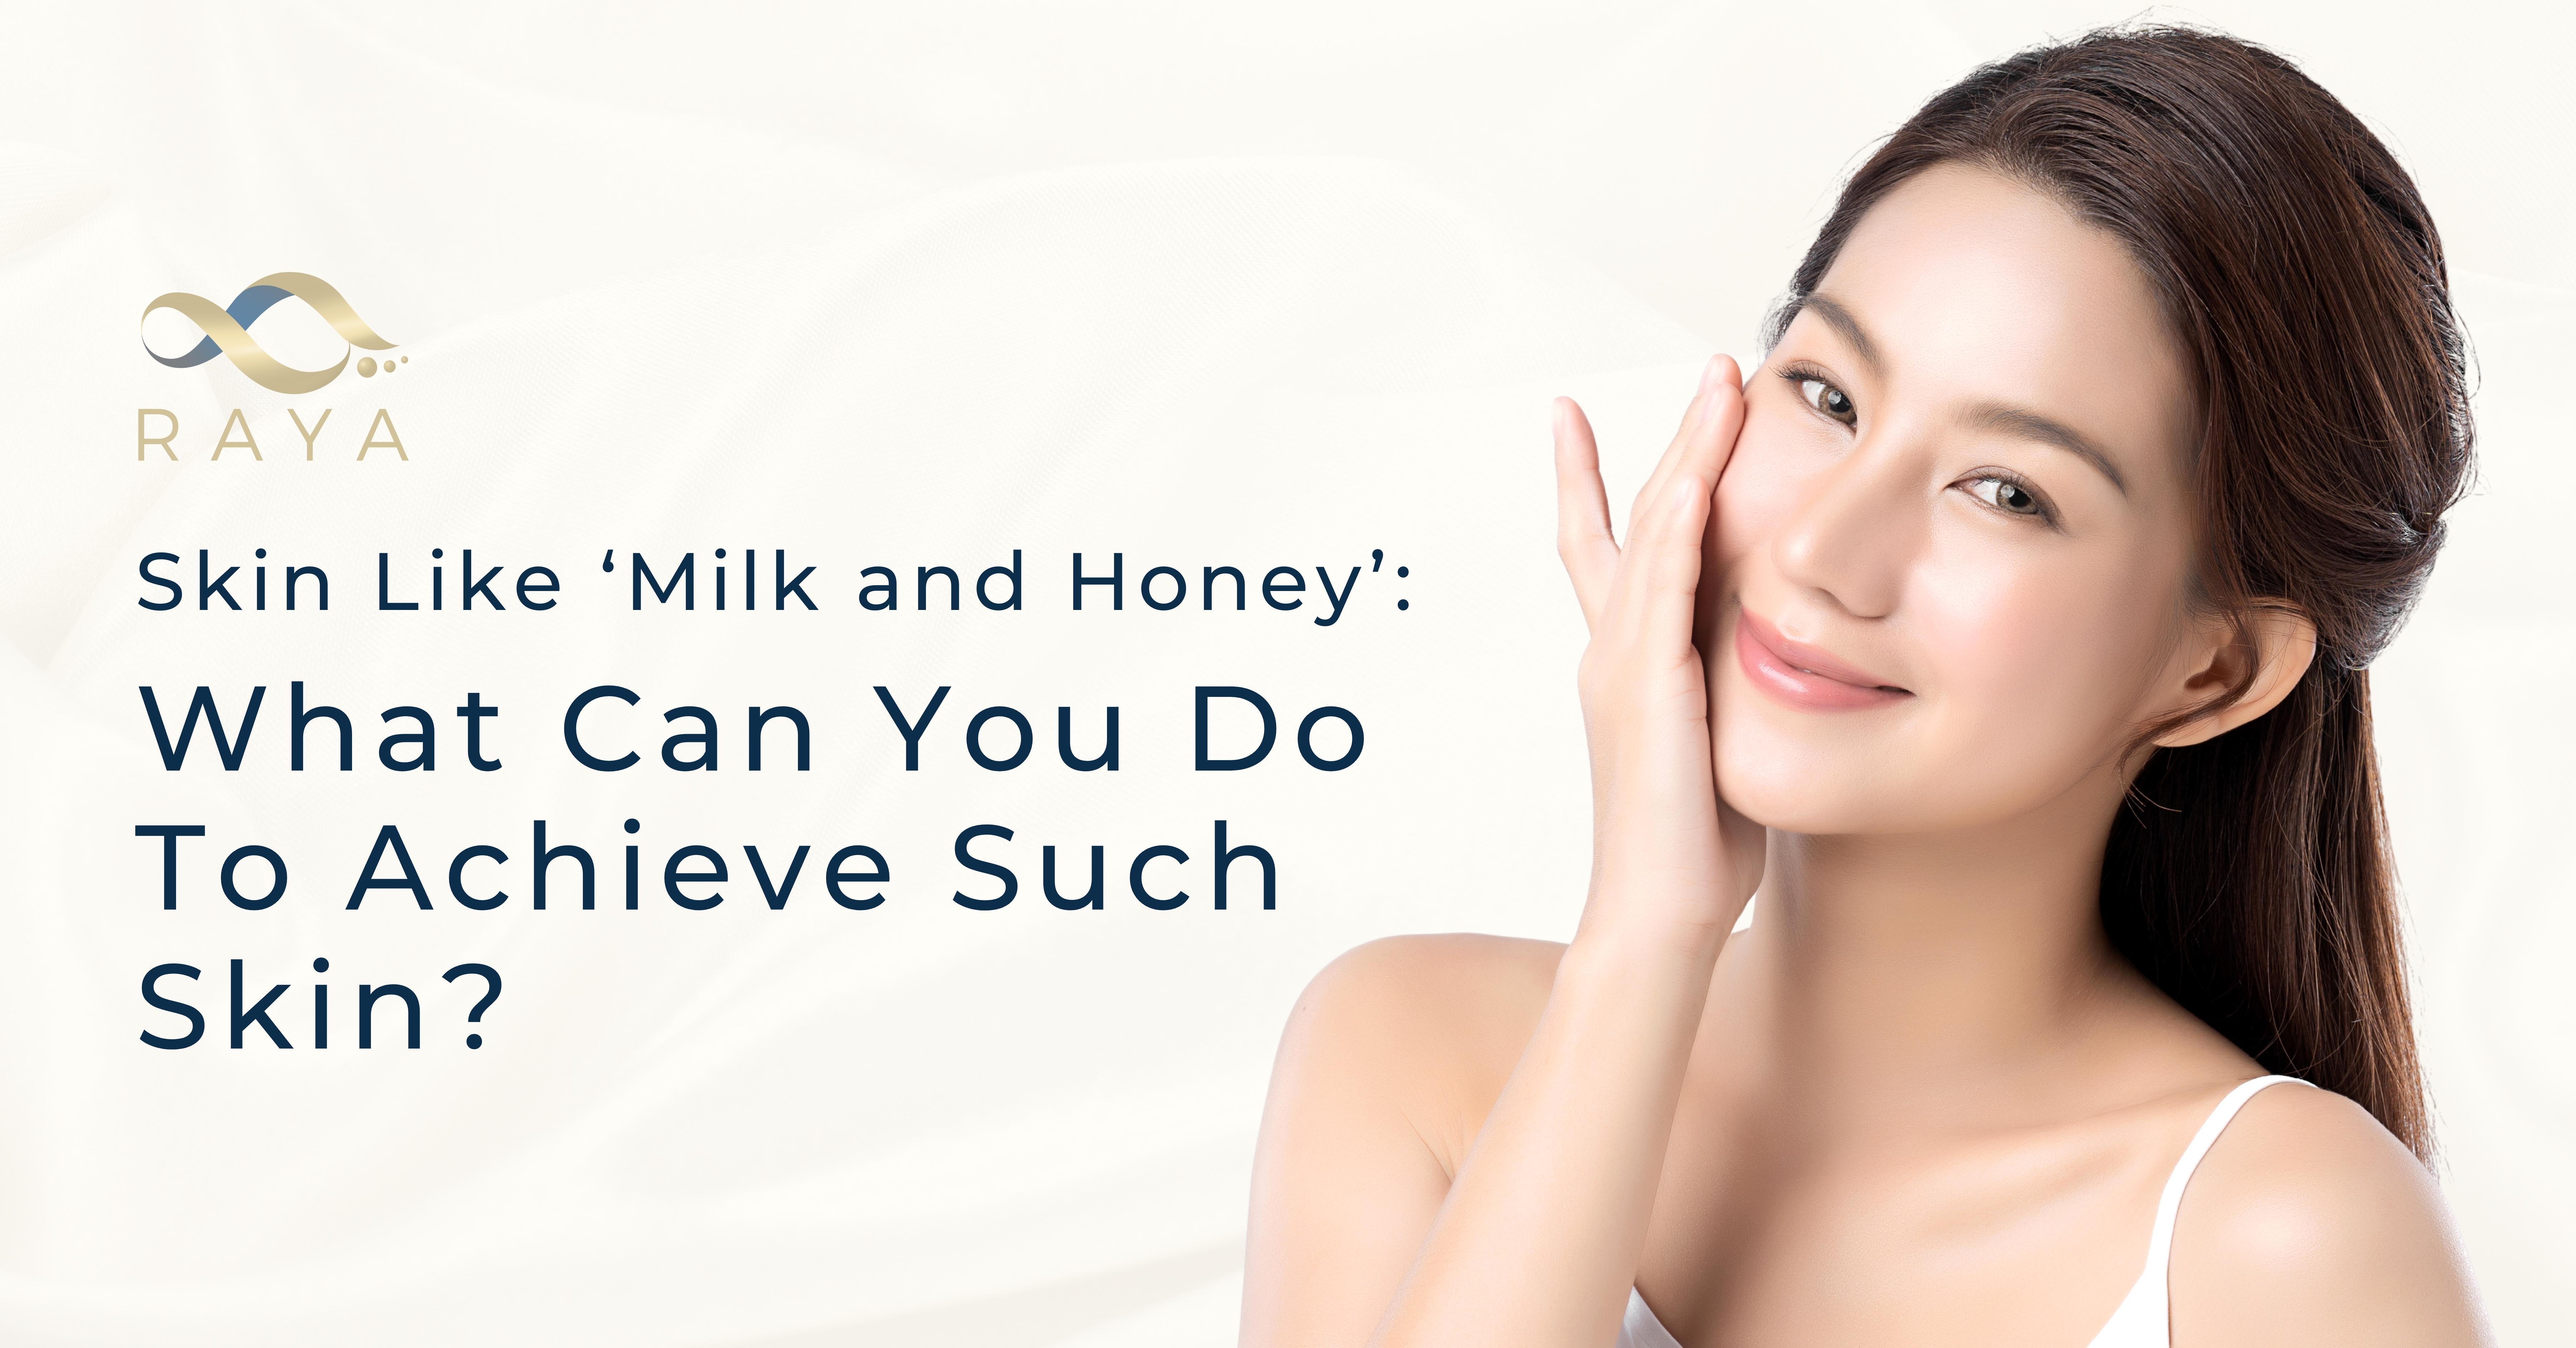 Skin Like ‘Milk and Honey’: What Can You Do To Achieve Such Skin?